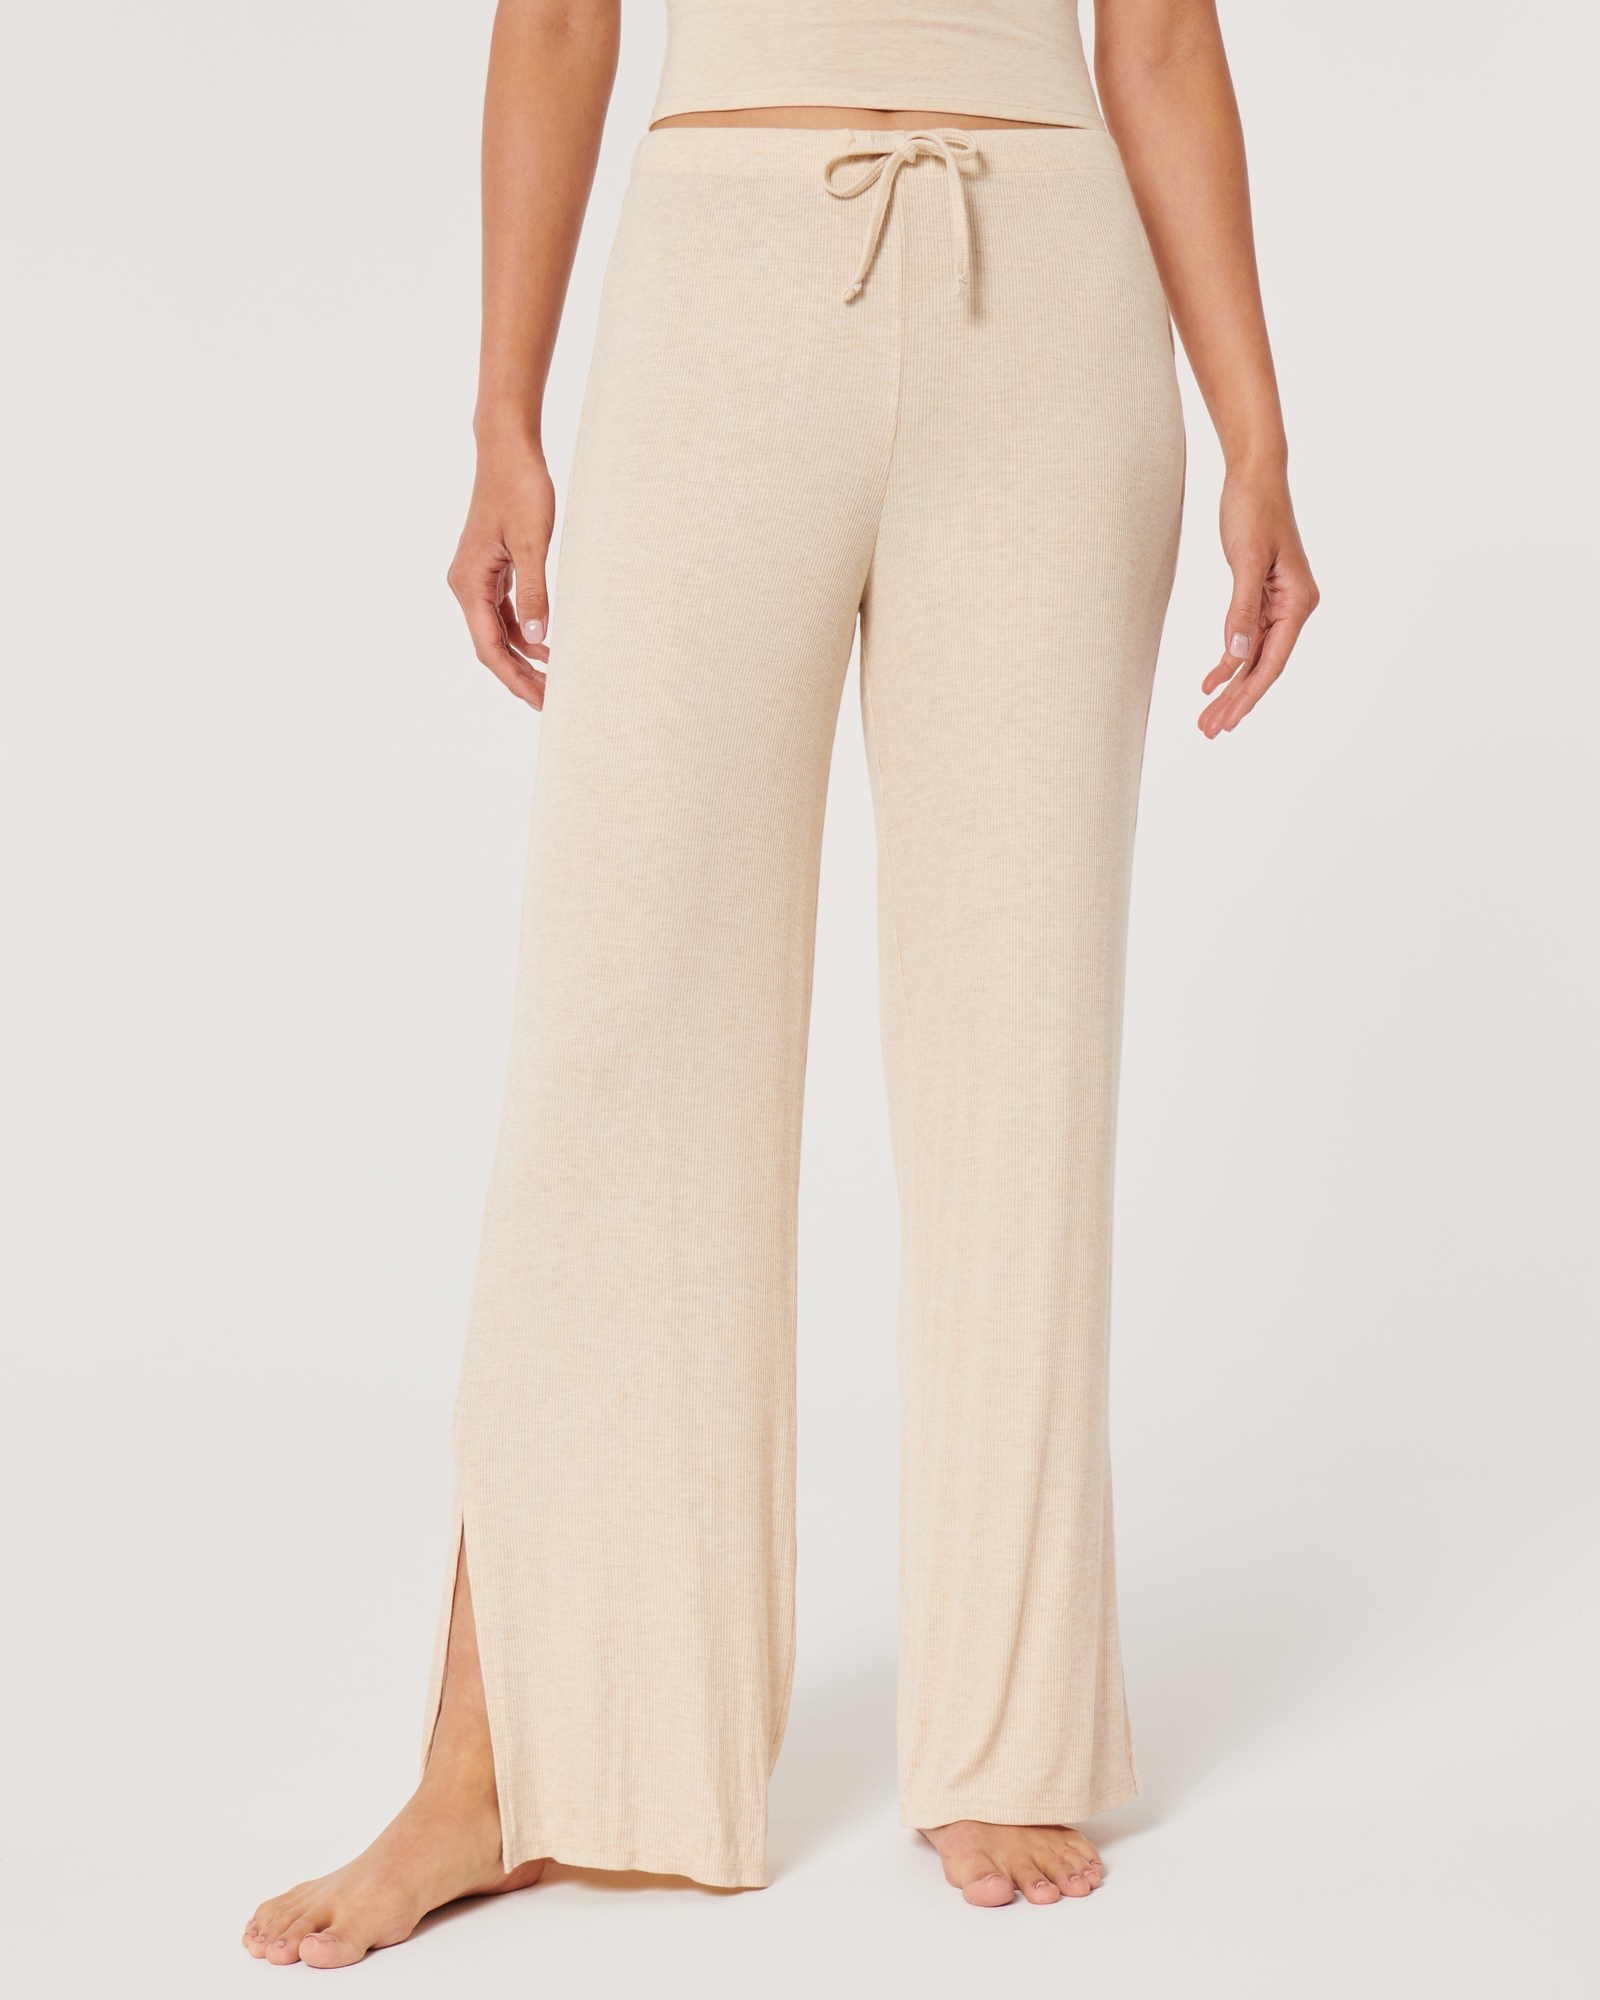 Women's Gilly Hicks Jersey Rib Flare Pants